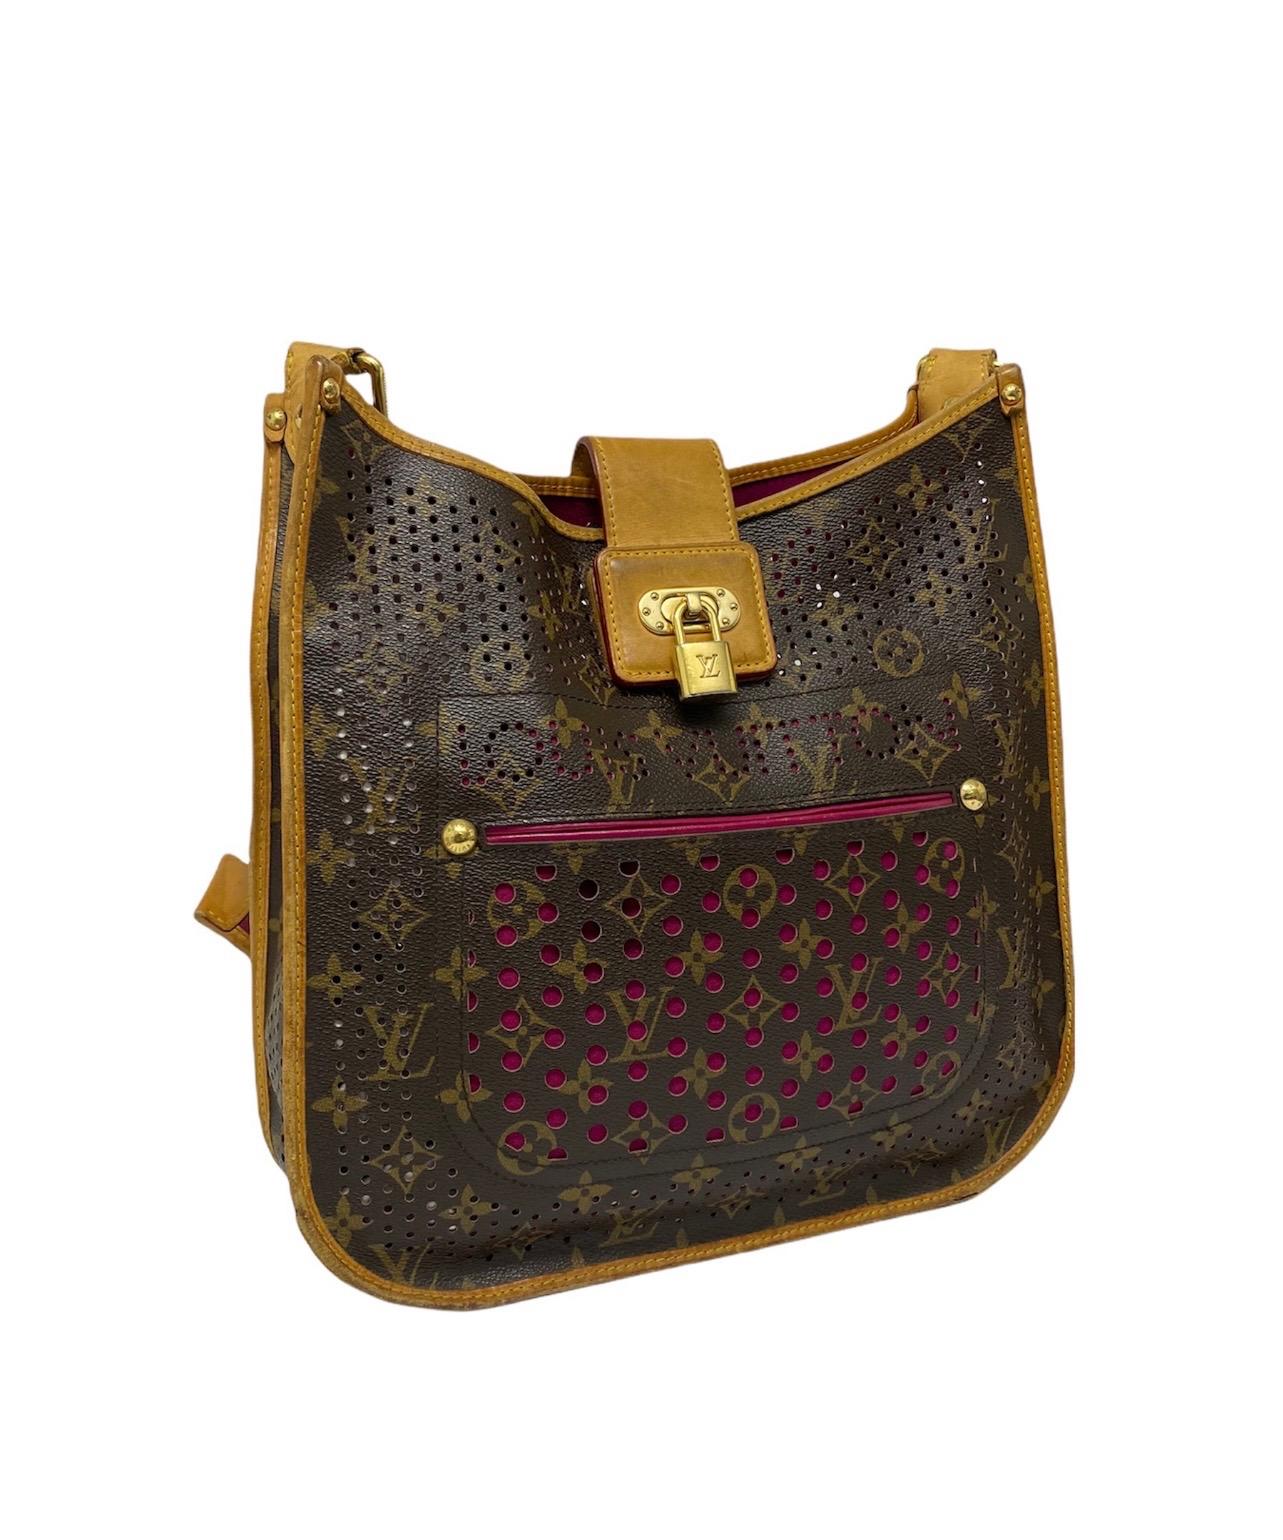 Fuchsia limited edition Louis Vuitton Musette bag with perforated monogram canvas with gold hardware.  It has a central opening with interlocking closure with a leather tongue. The interior is lined with a purple alcantara fabric. Large space on the